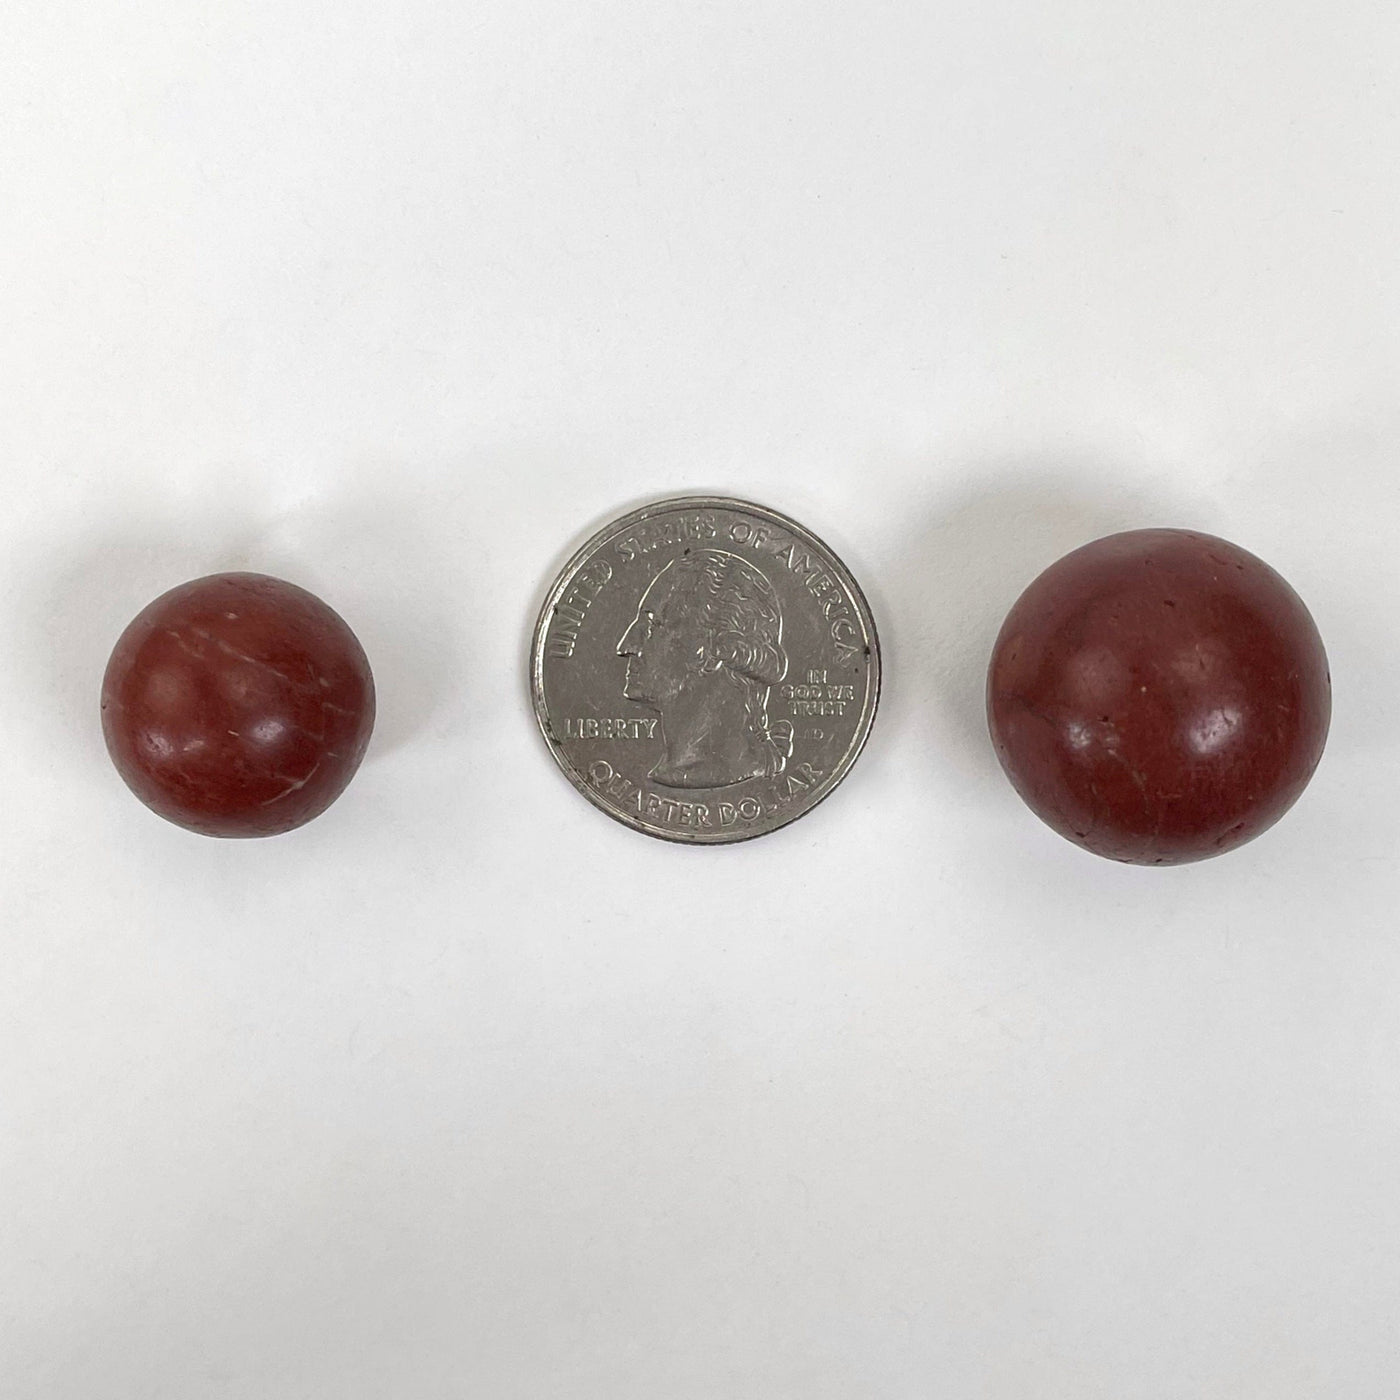 close up of two red jasper spheres on white background with quarter for size reference